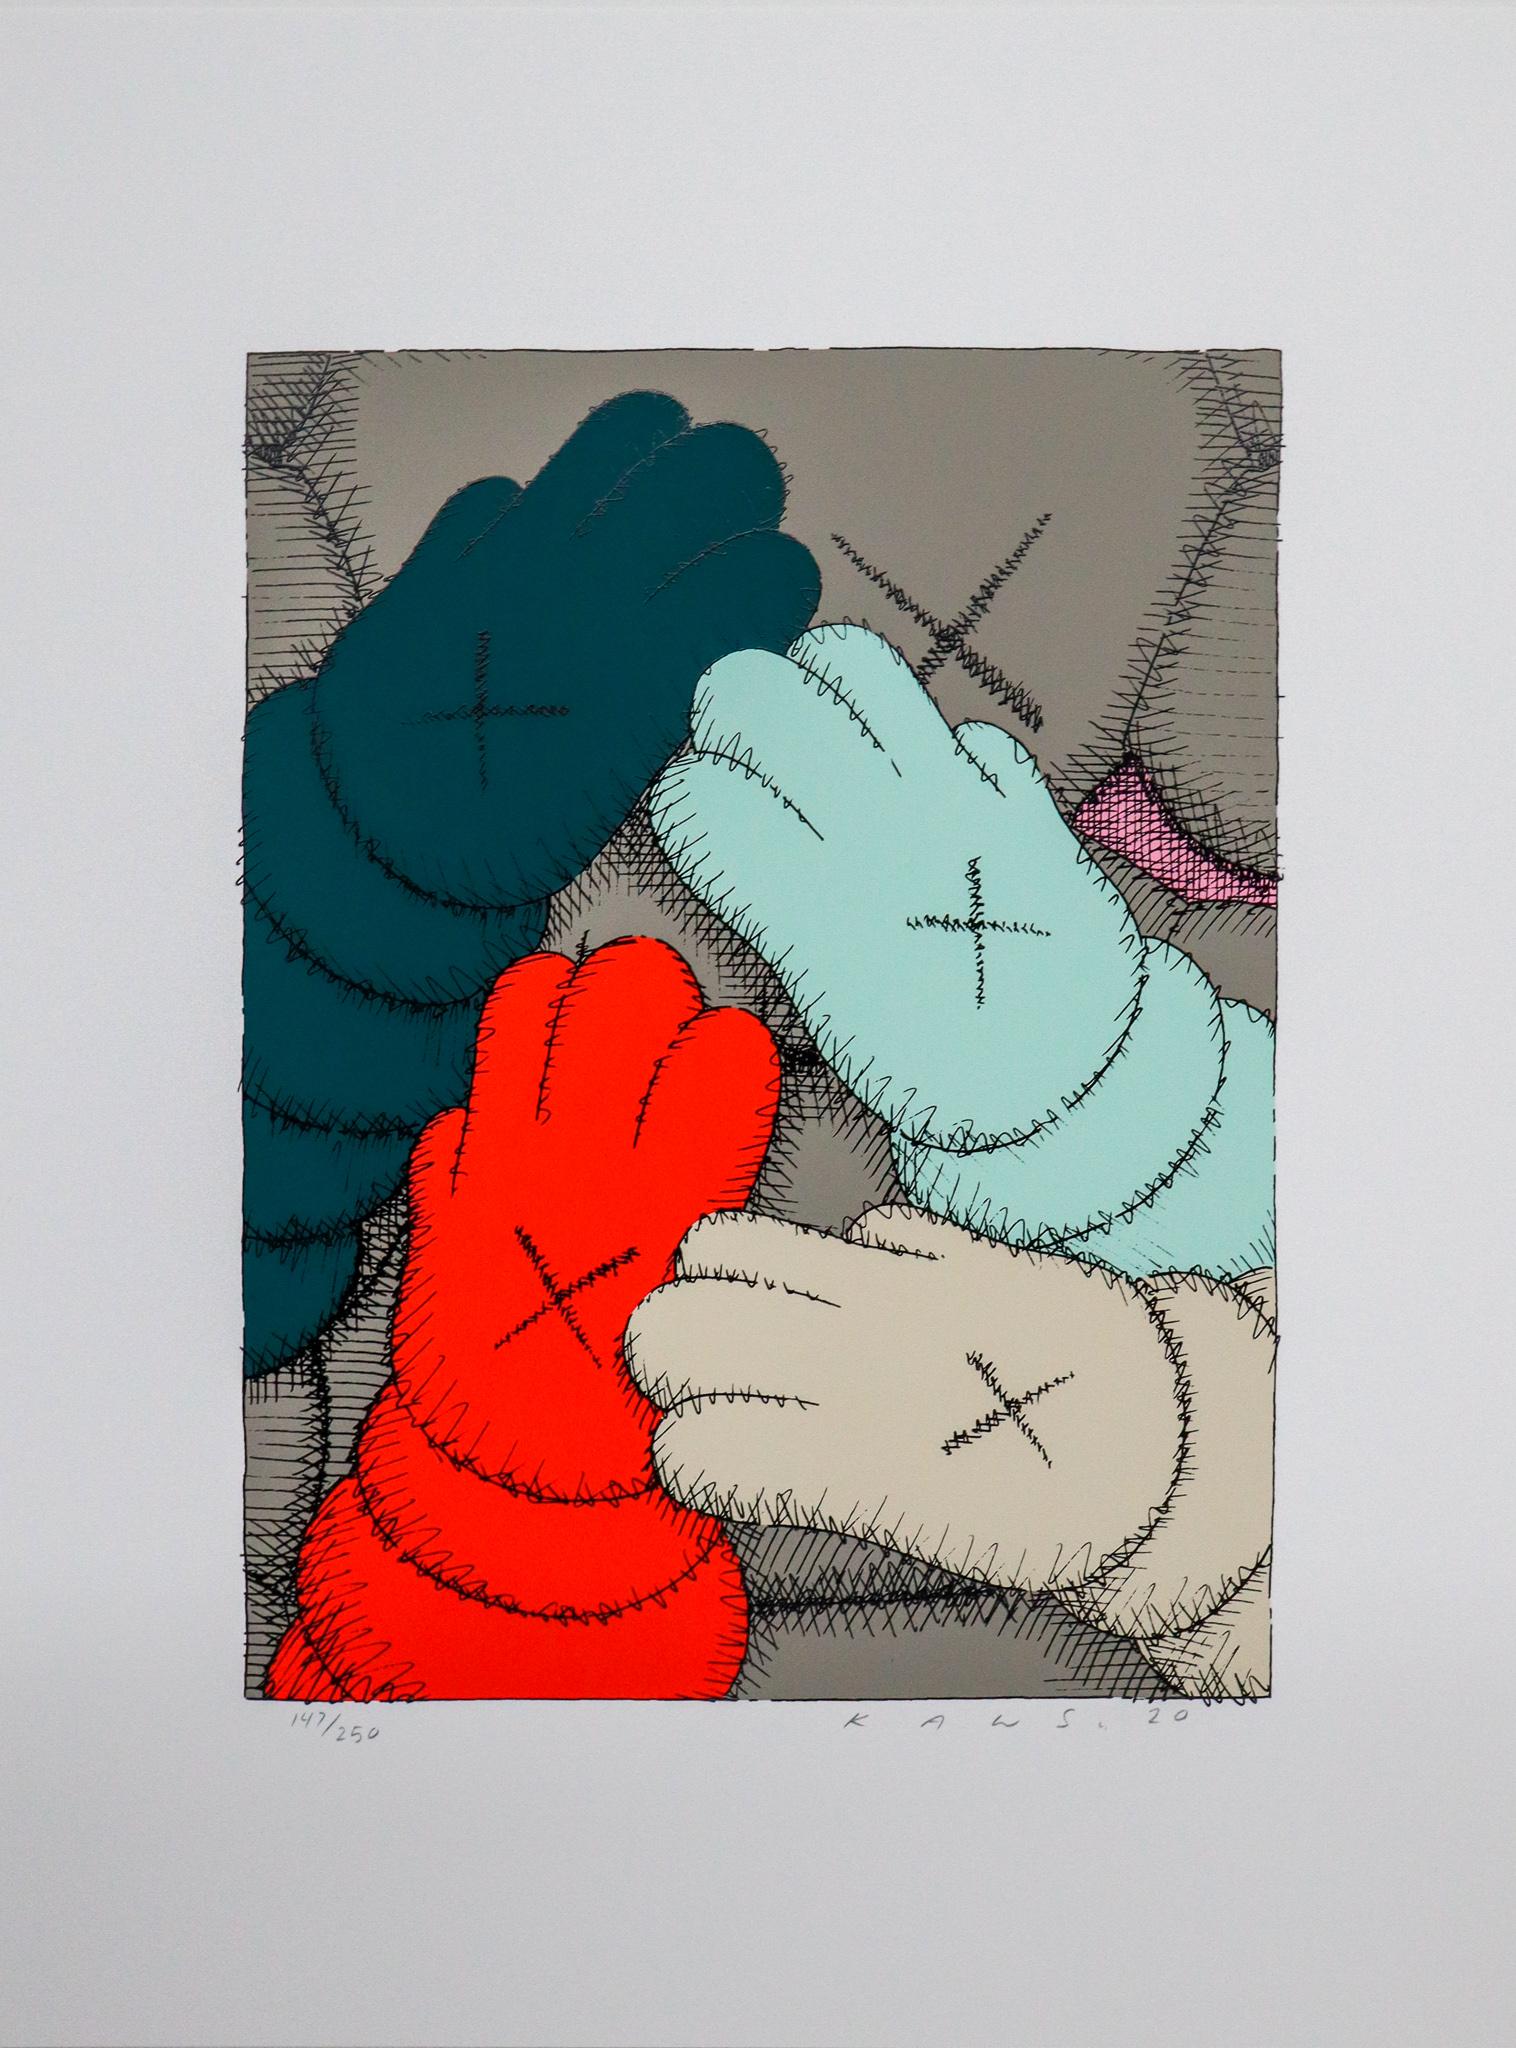 KAWS
Untitled from Urge (Grey)
From the rare limited edition of 250
Original Screen print on paper
Hand signed and numbered
MINT Condition
